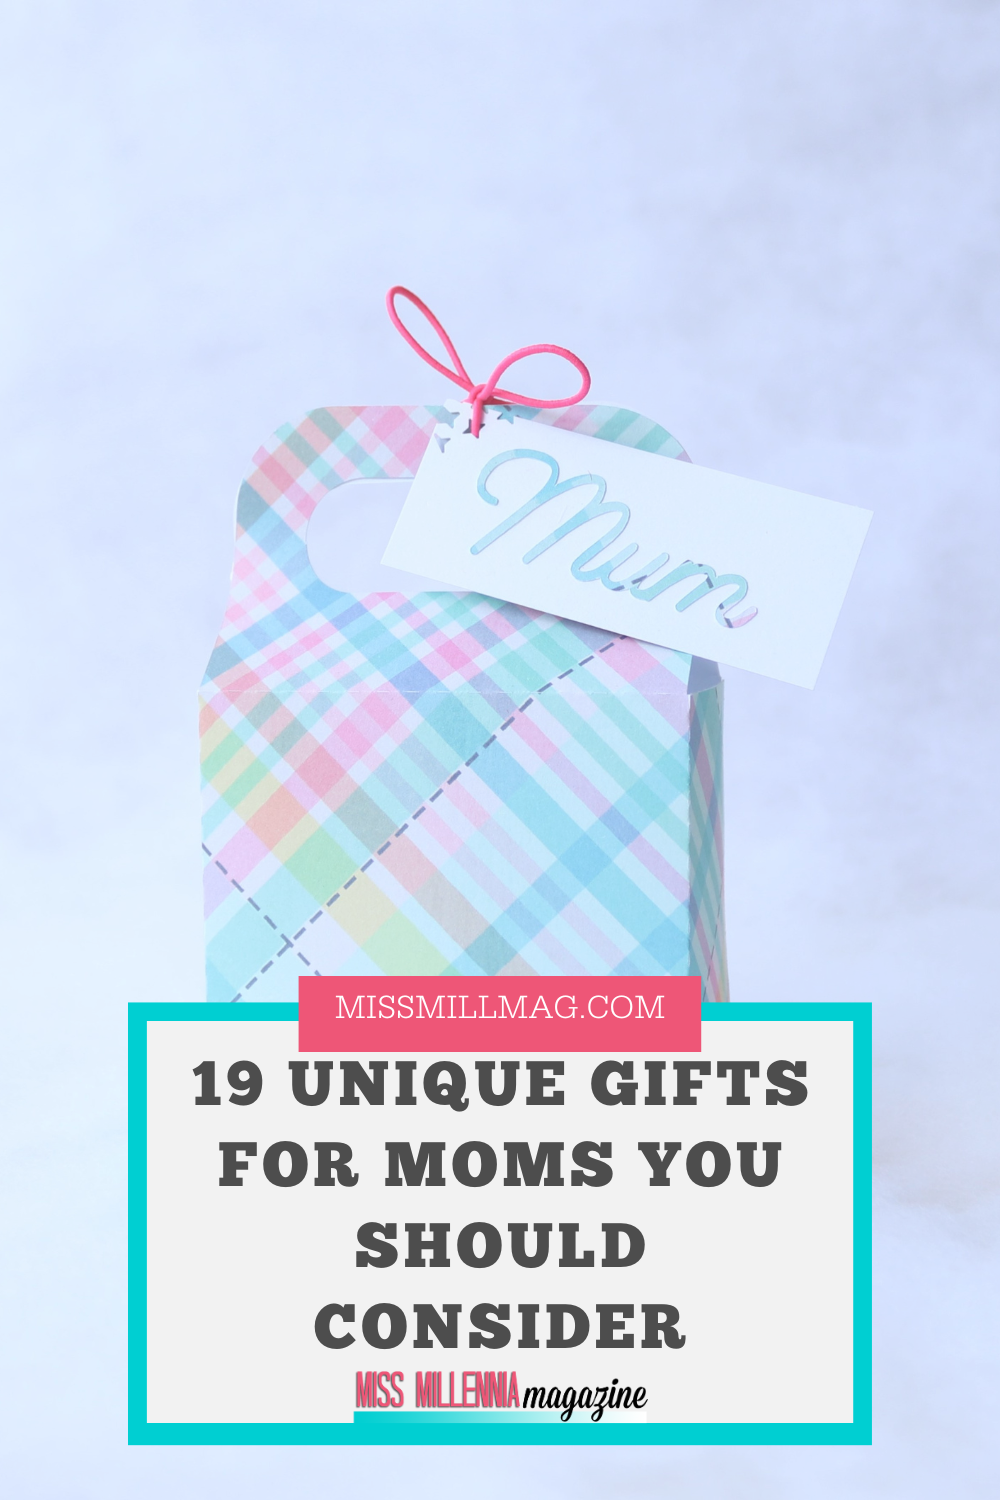 19 Unique Gifts For Moms You Should Consider